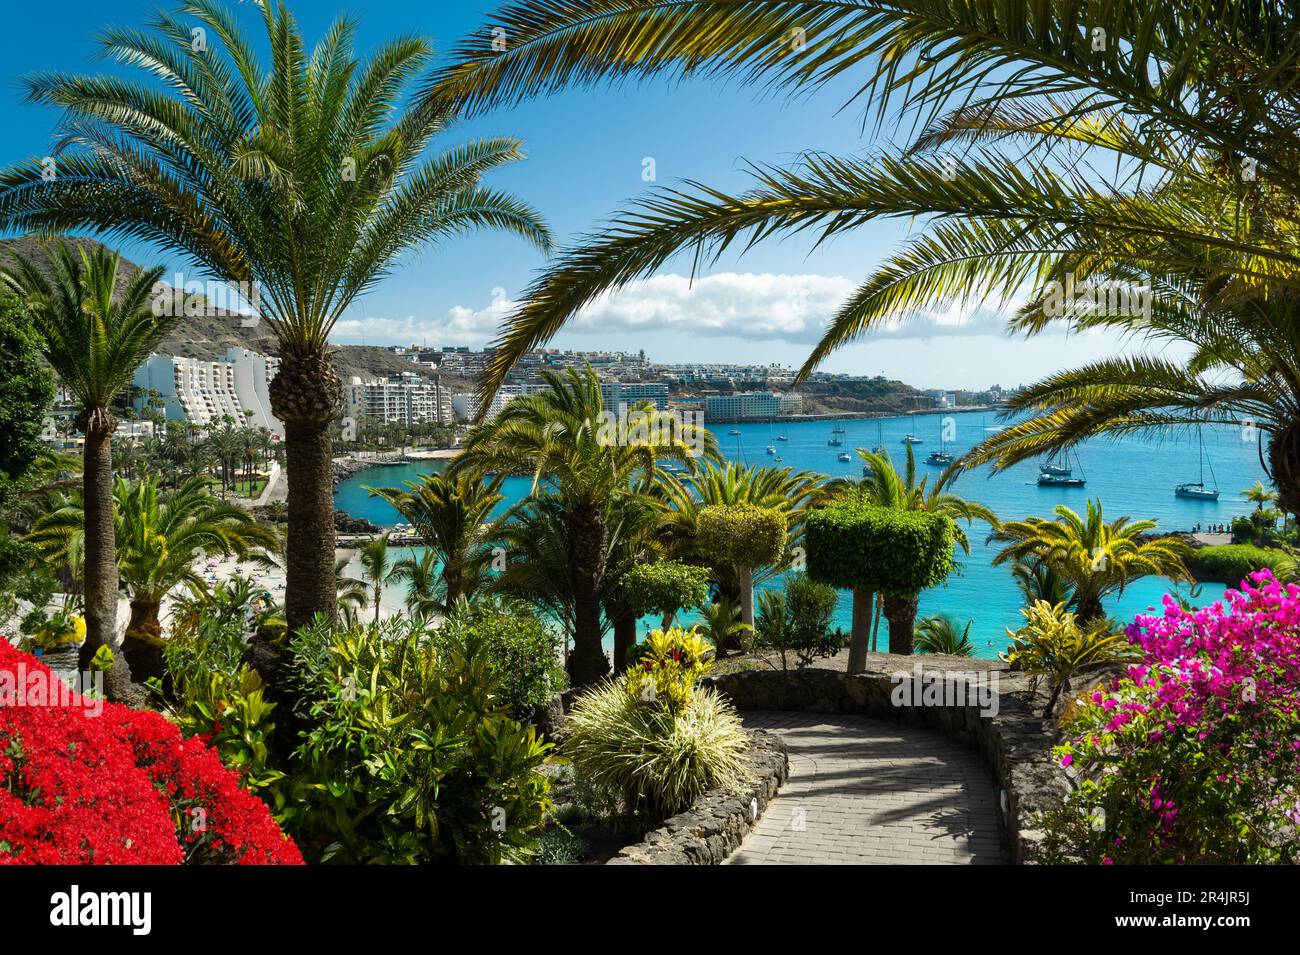 View of a beautiful public garden with tropical palm trees and red flowers above the blue Atlantic Ocean coast in Las Palmas, Spain Stock Photo